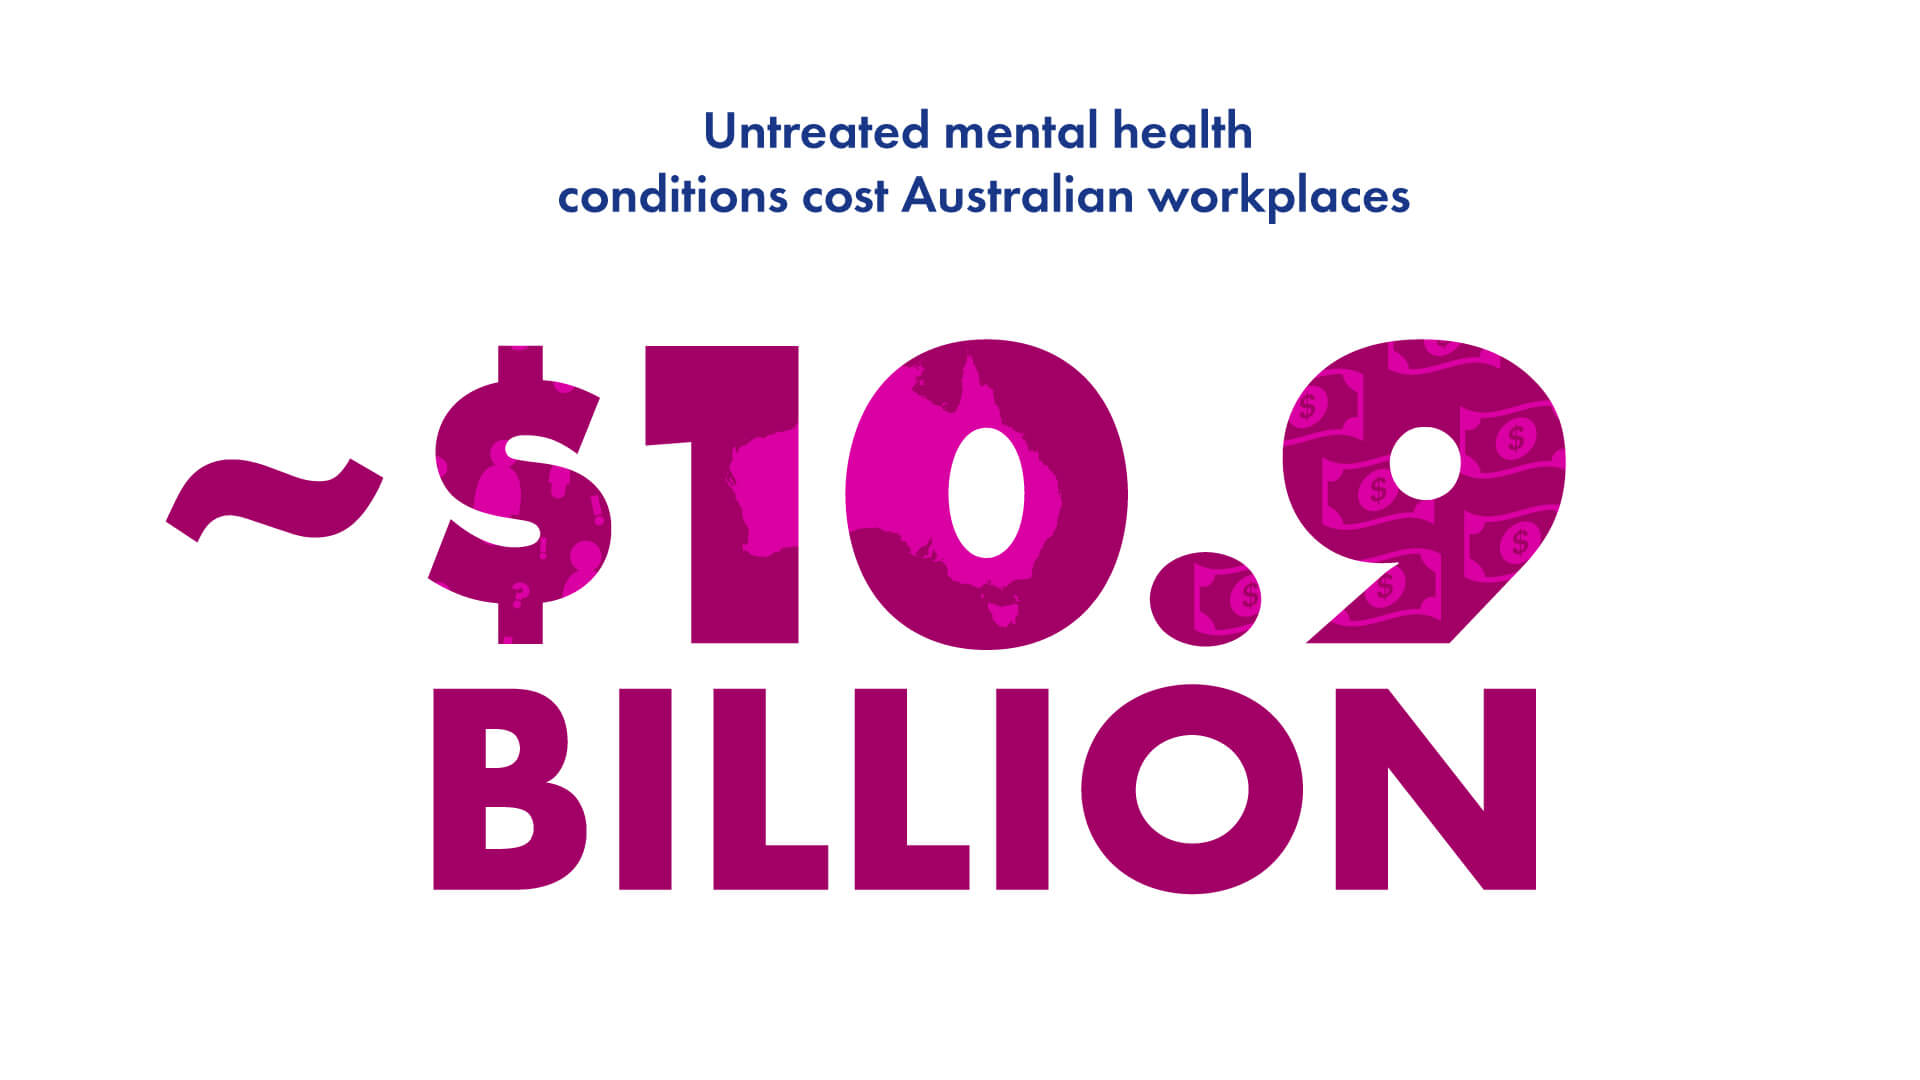 Premium Health - Untreated Mental Health Workplace Cost